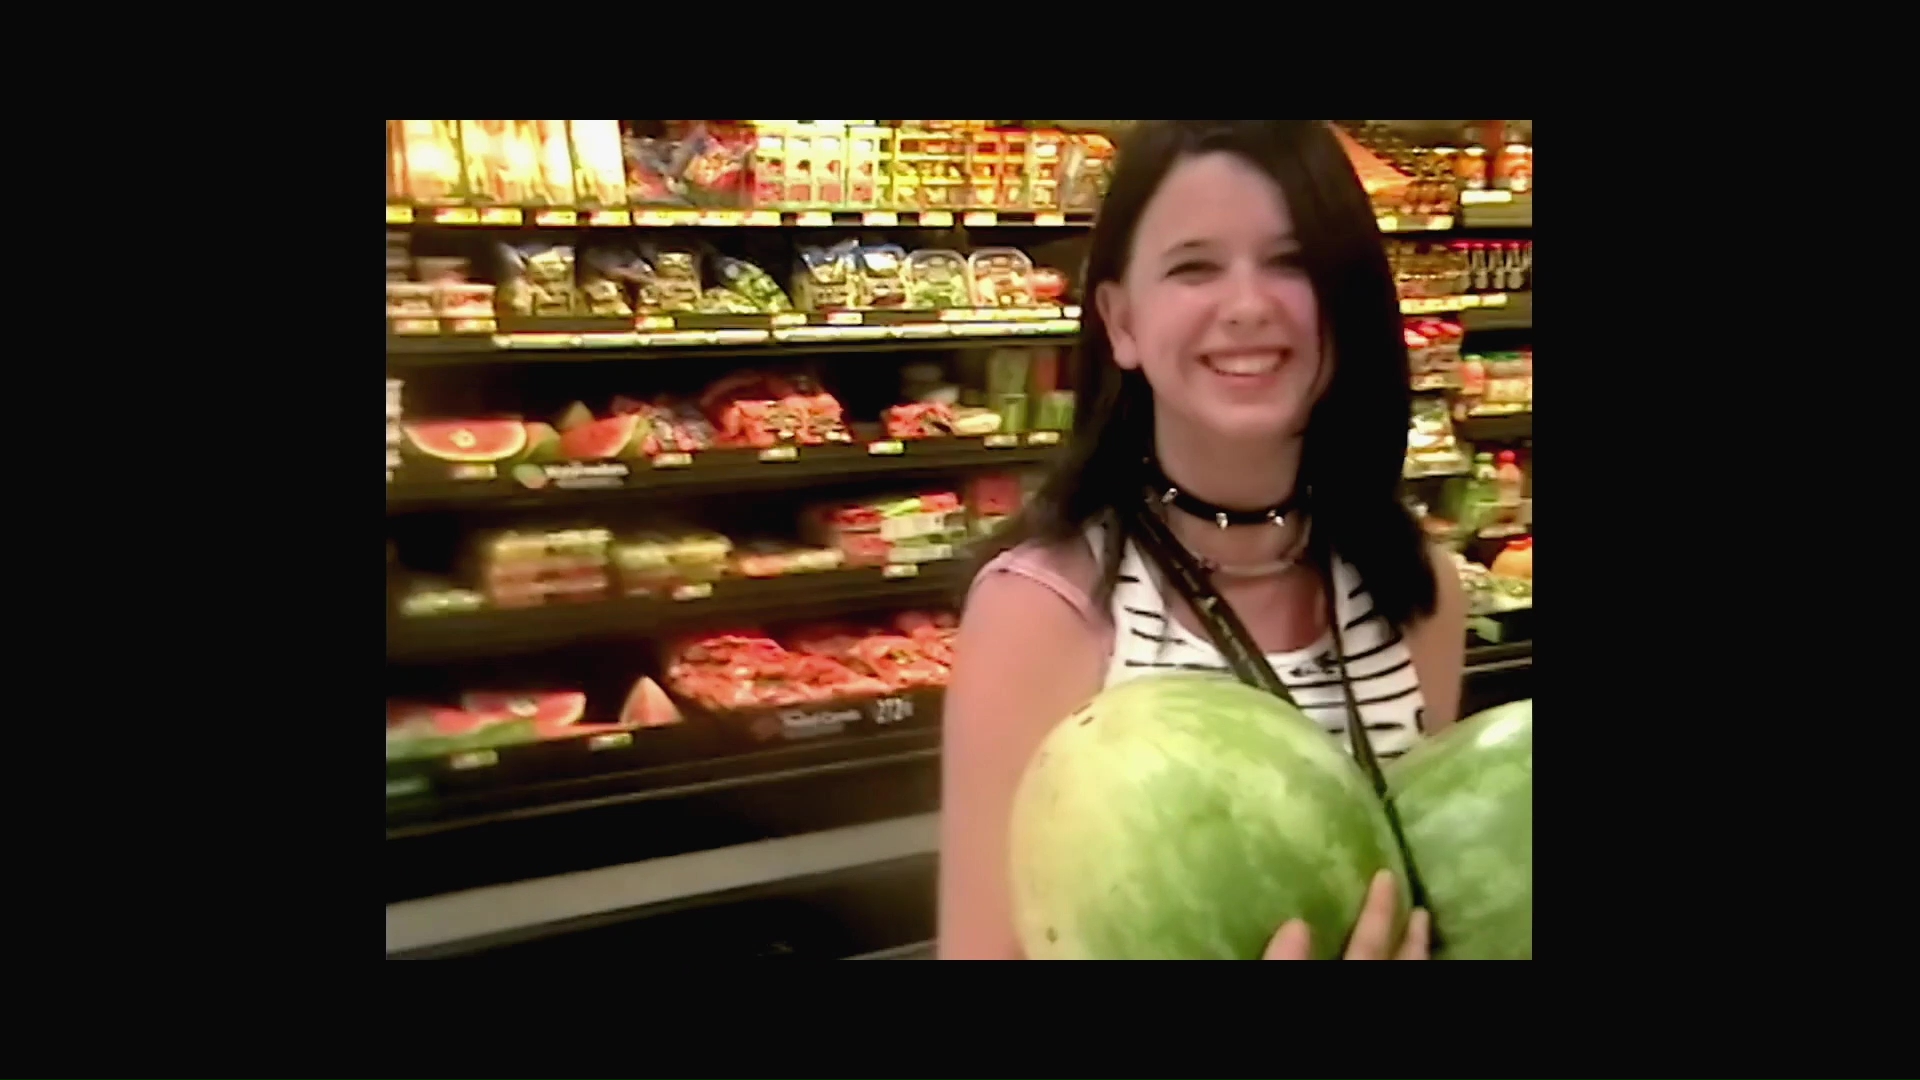 Grocery store shenanigans in Clarissa's video diary